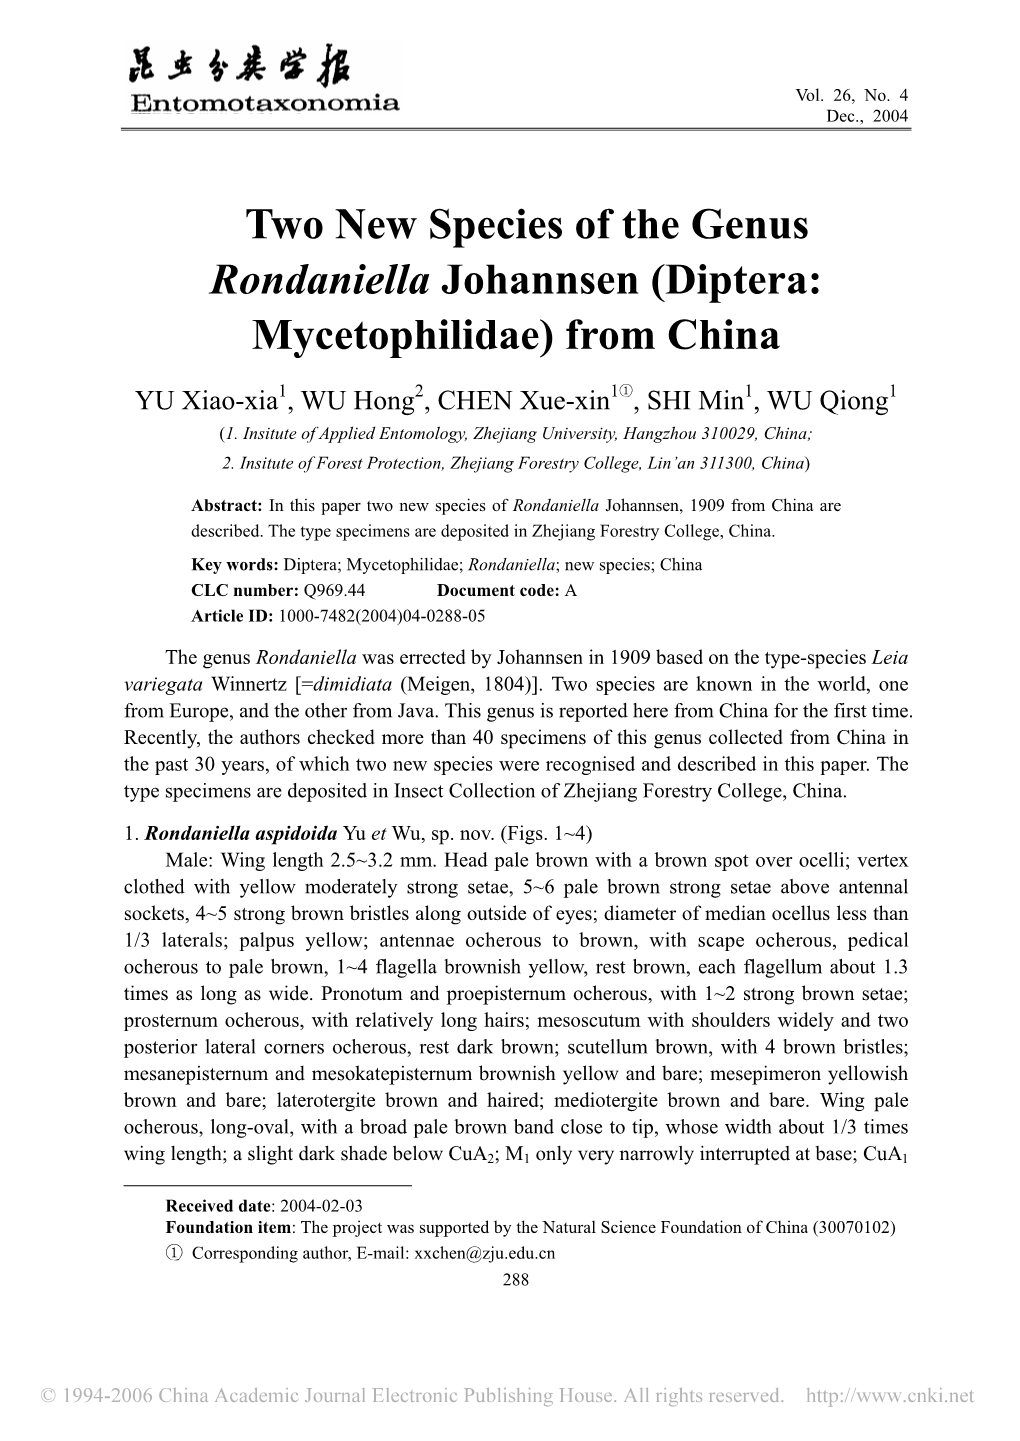 Two New Species of the Genus Rondaniella Johannsen (Diptera: Mycetophilidae) from China